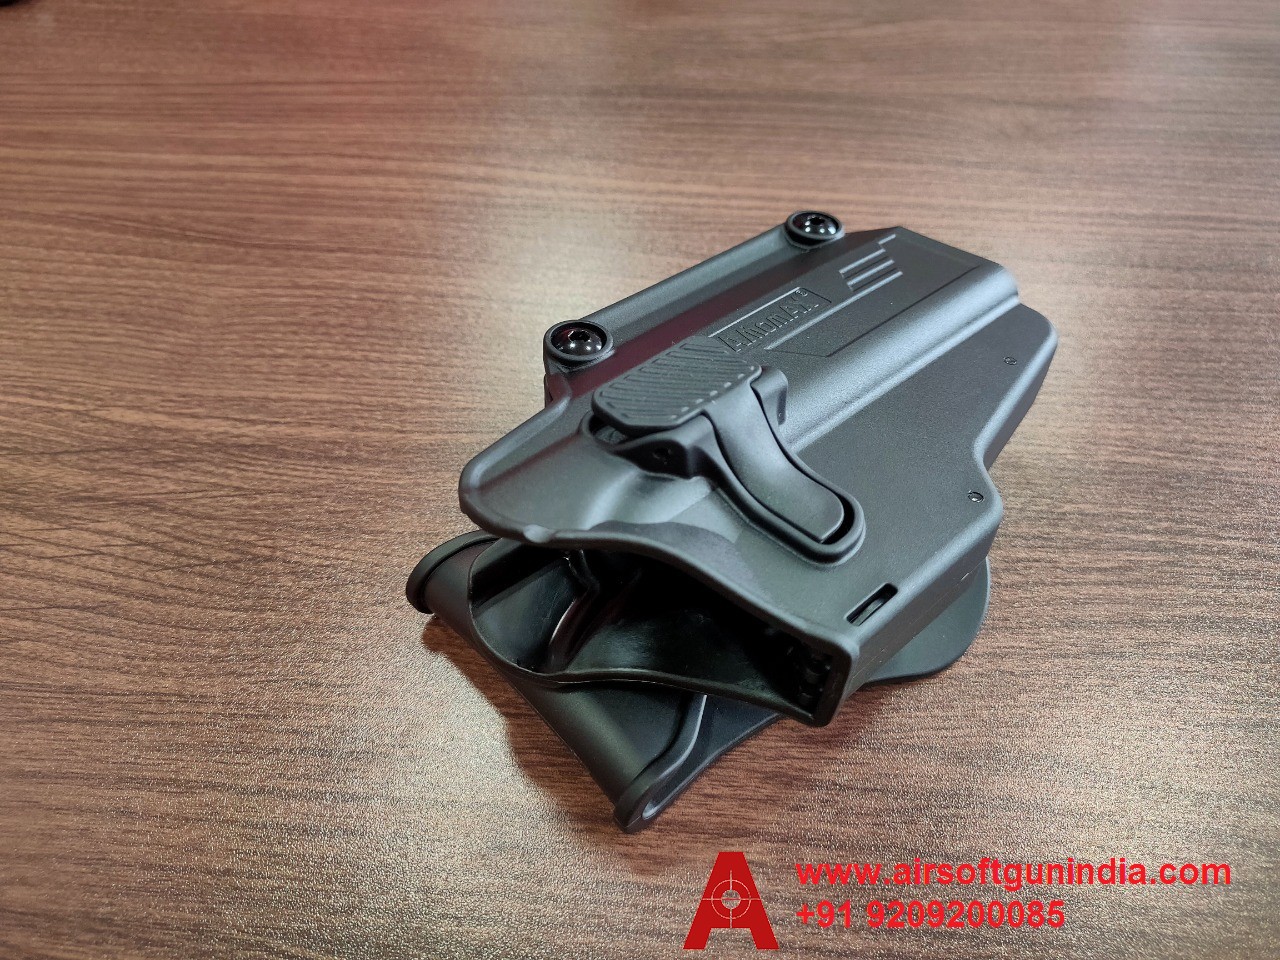 Universal Holster For Air Pistol By Airsoft Gun India